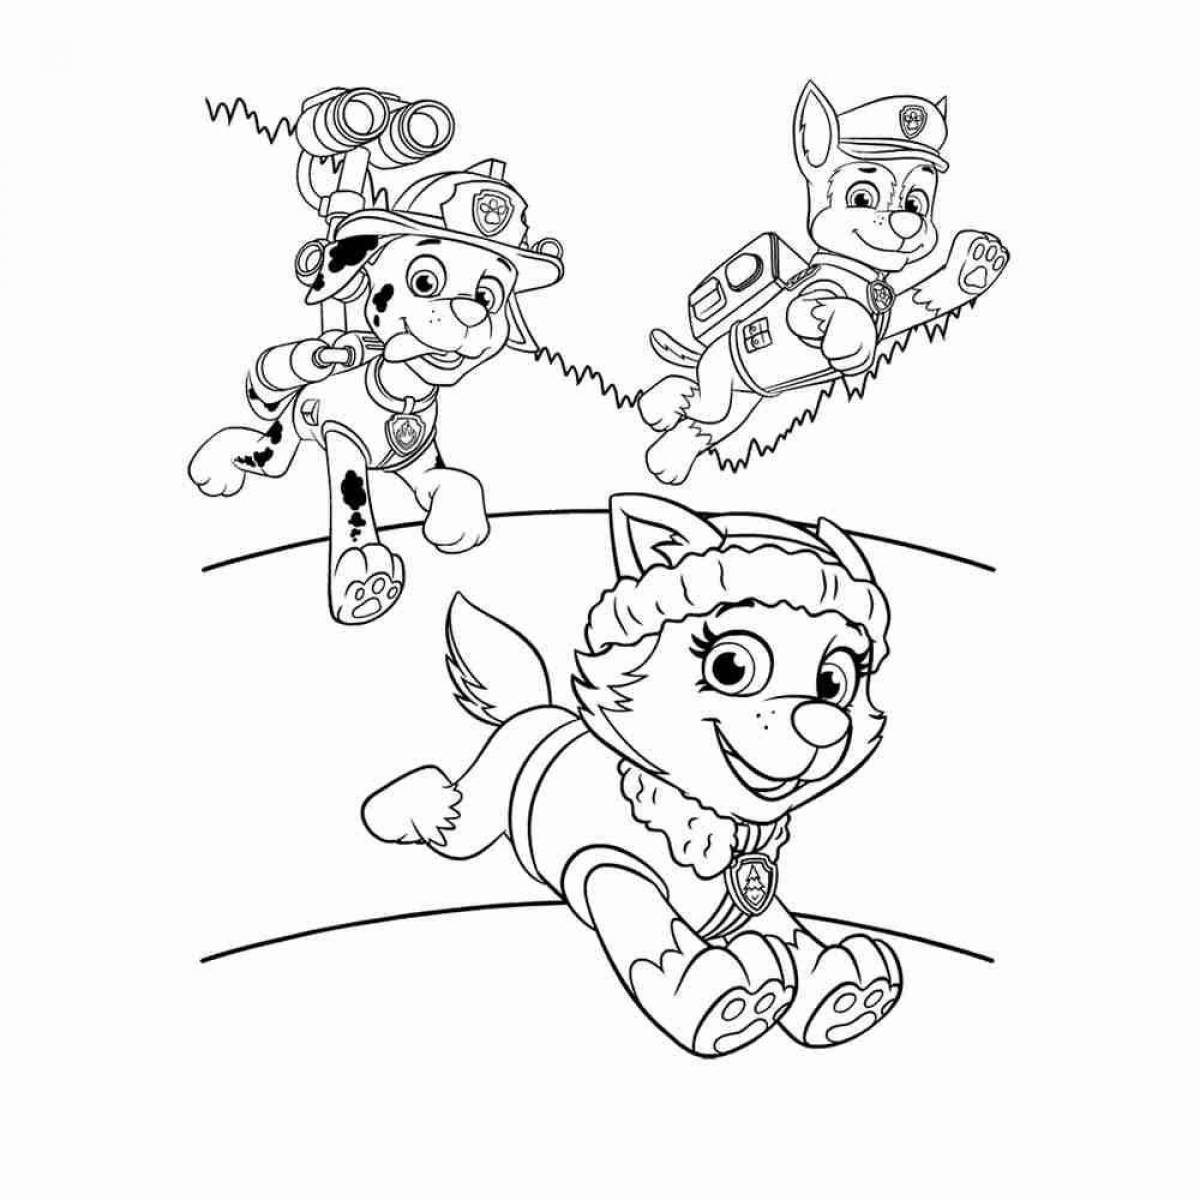 Coloring page playful racer and skye